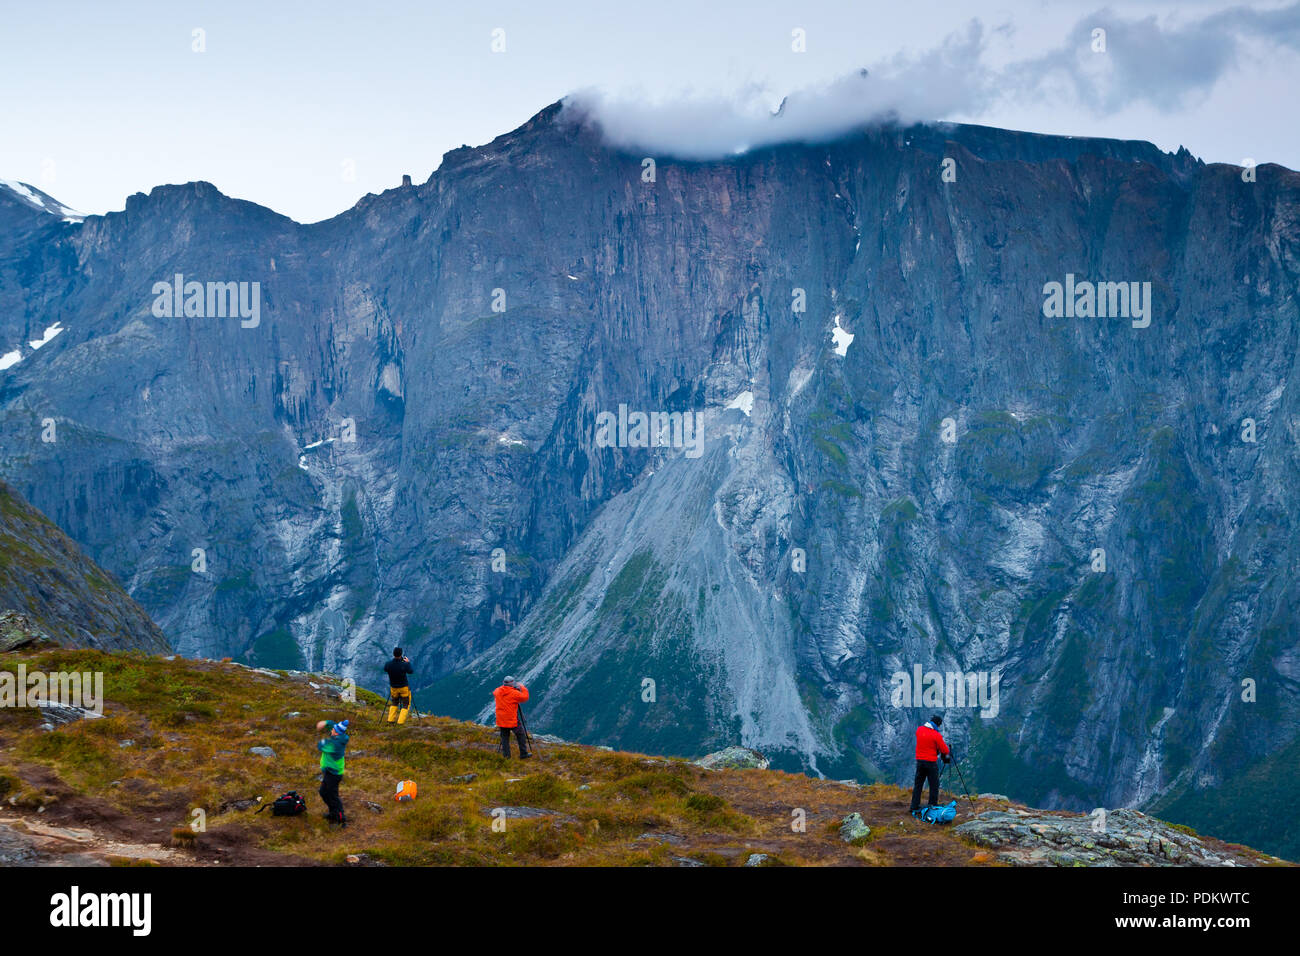 Outdoor photographers taking pictures of the dramatic scenery in Romsdalen, Møre og Romsdal Norway. Stock Photo